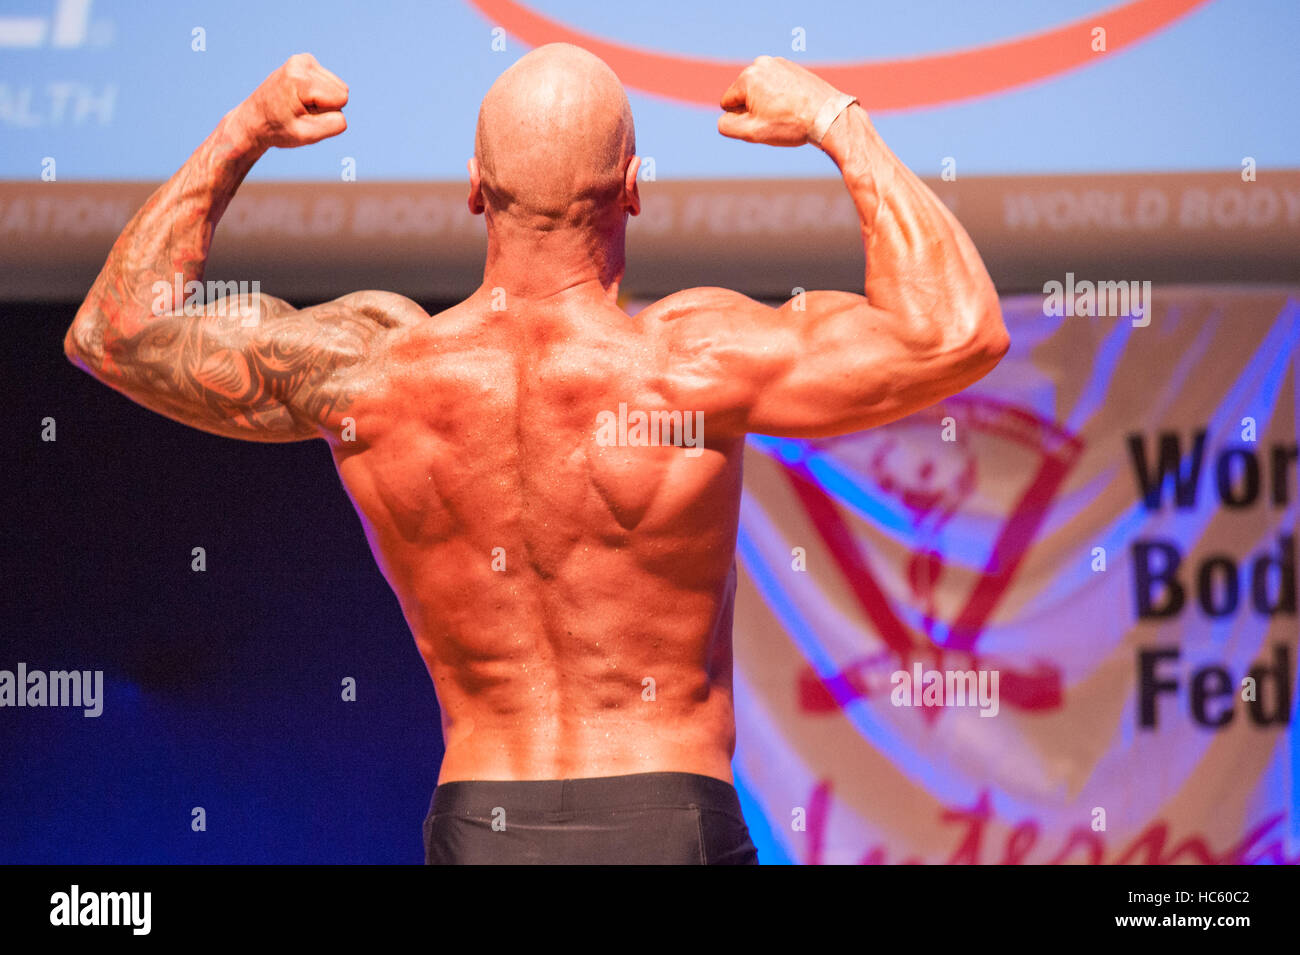 MAASTRICHT, THE NETHERLANDS - OCTOBER 25, 2015: Male bodybuilder Erik Stobbe shows his best back double biceps pose at the World Grandprix Stock Photo